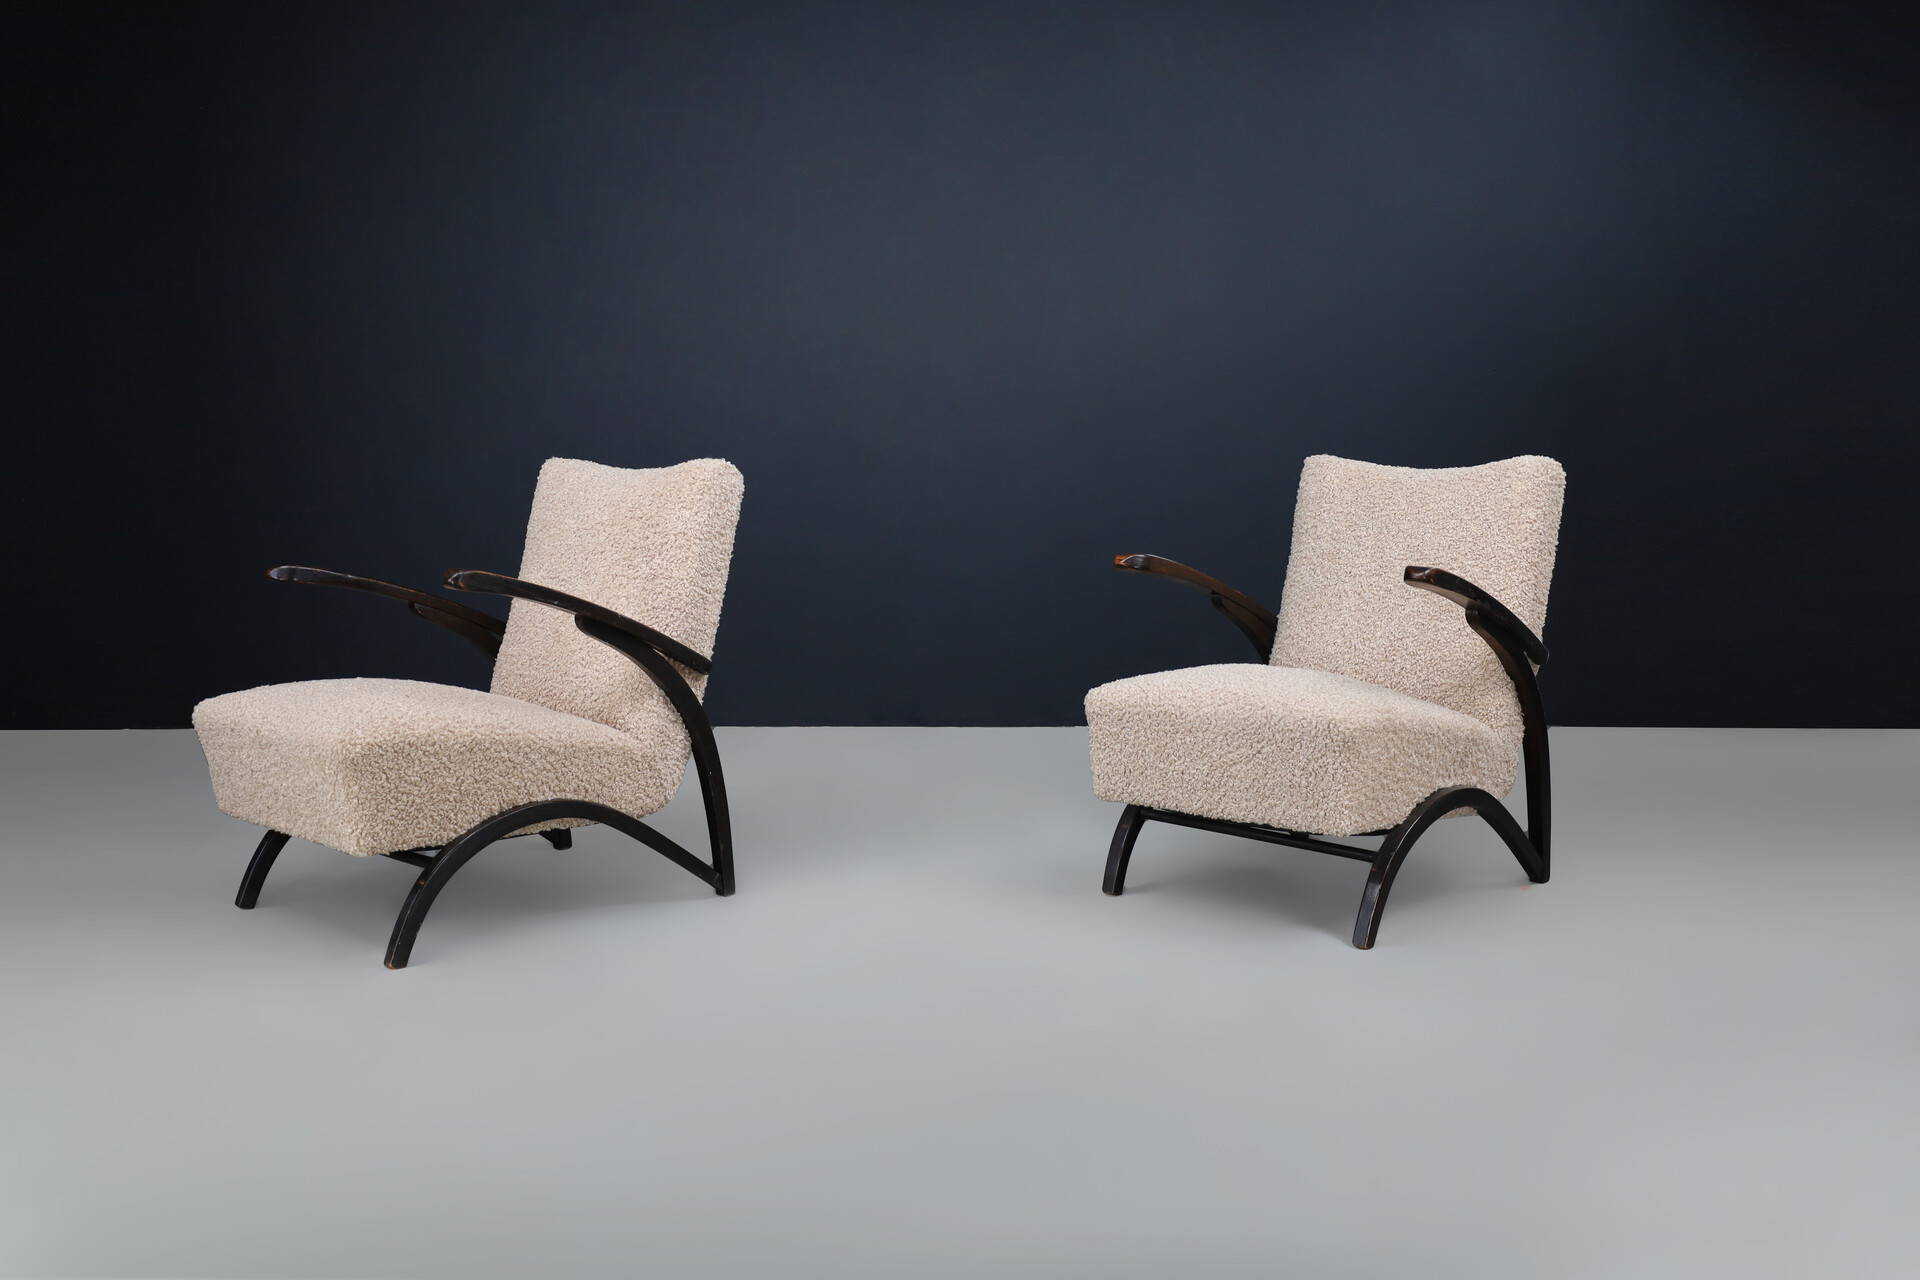 Mid century modern Art Deco lounge chairs in bouclé upholstery by Jindřich Halabala, 1940s Mid-20th century